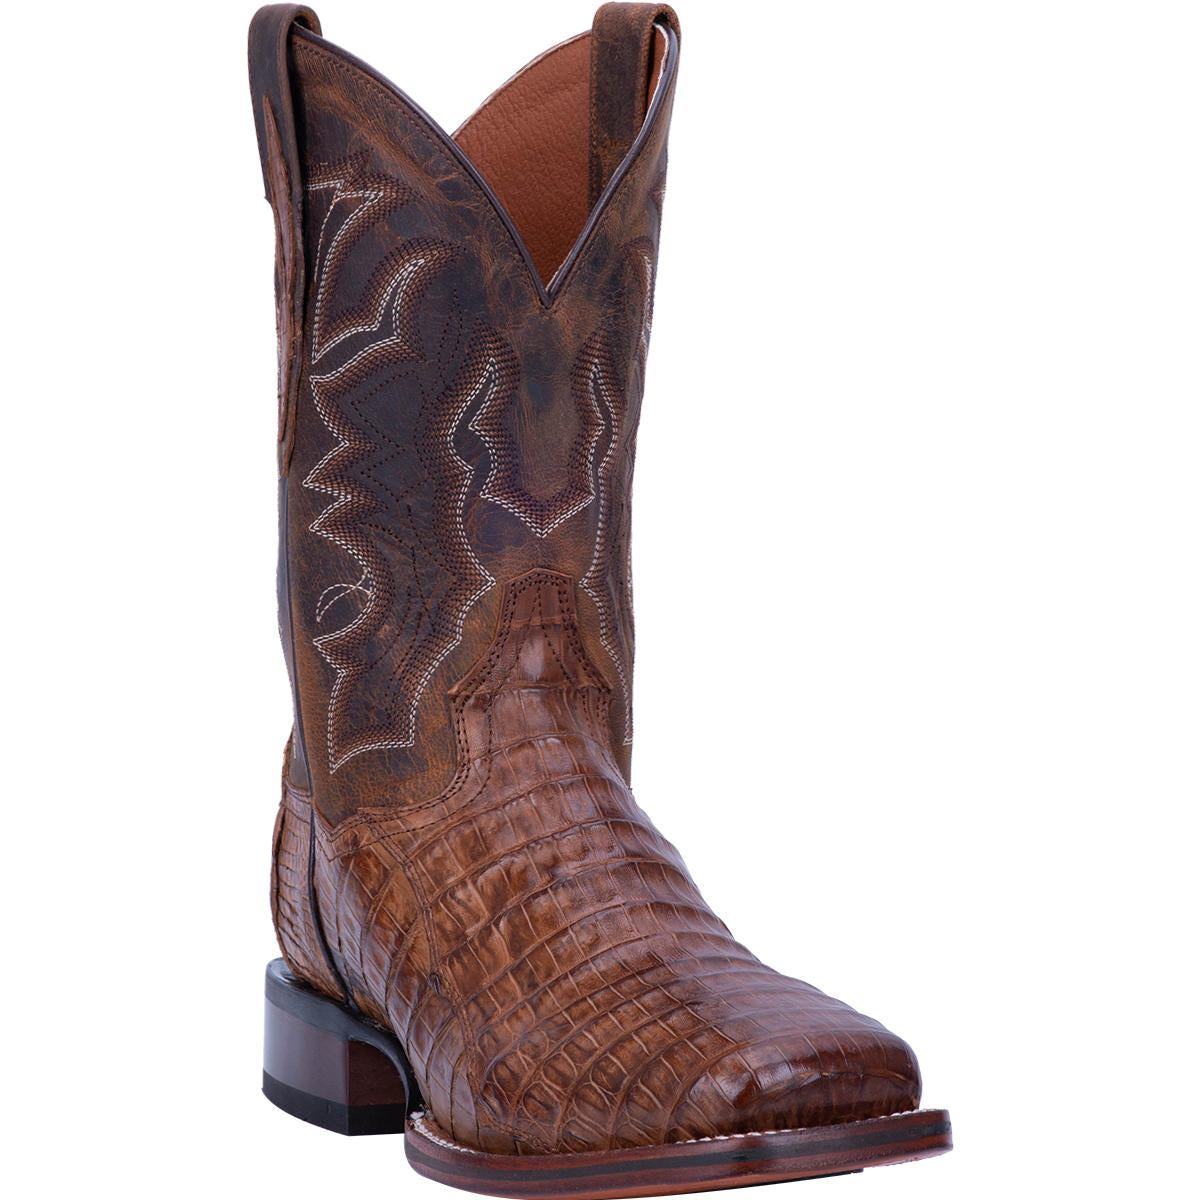 Men's Can Post Caiman Bay Apache/Chocolate Boots